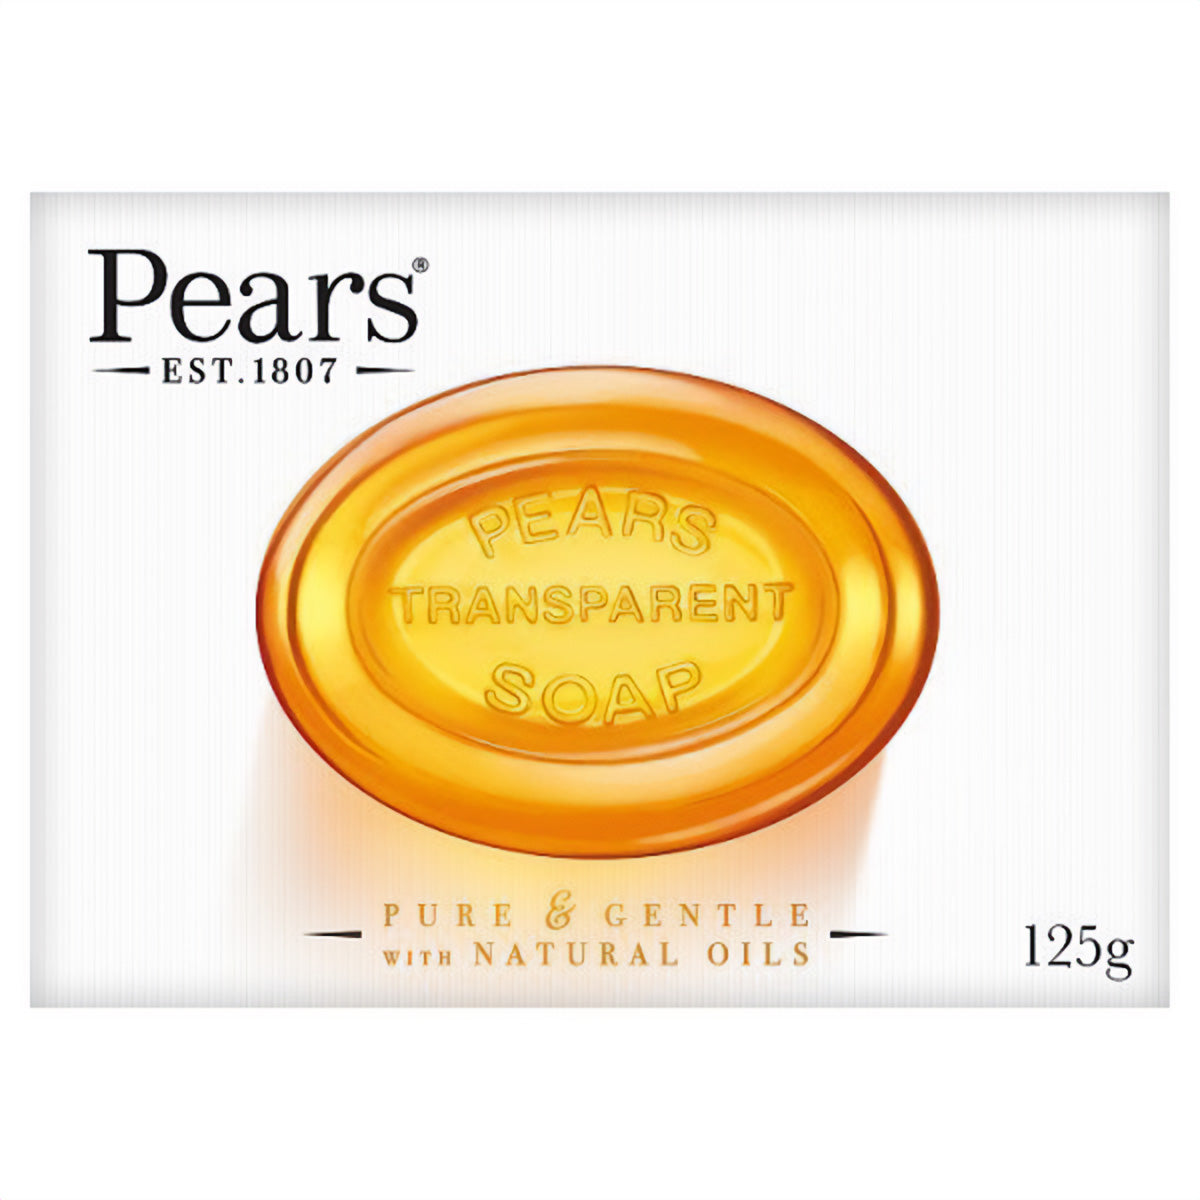 Pears - Transparent Soap - 125g - Continental Food Store